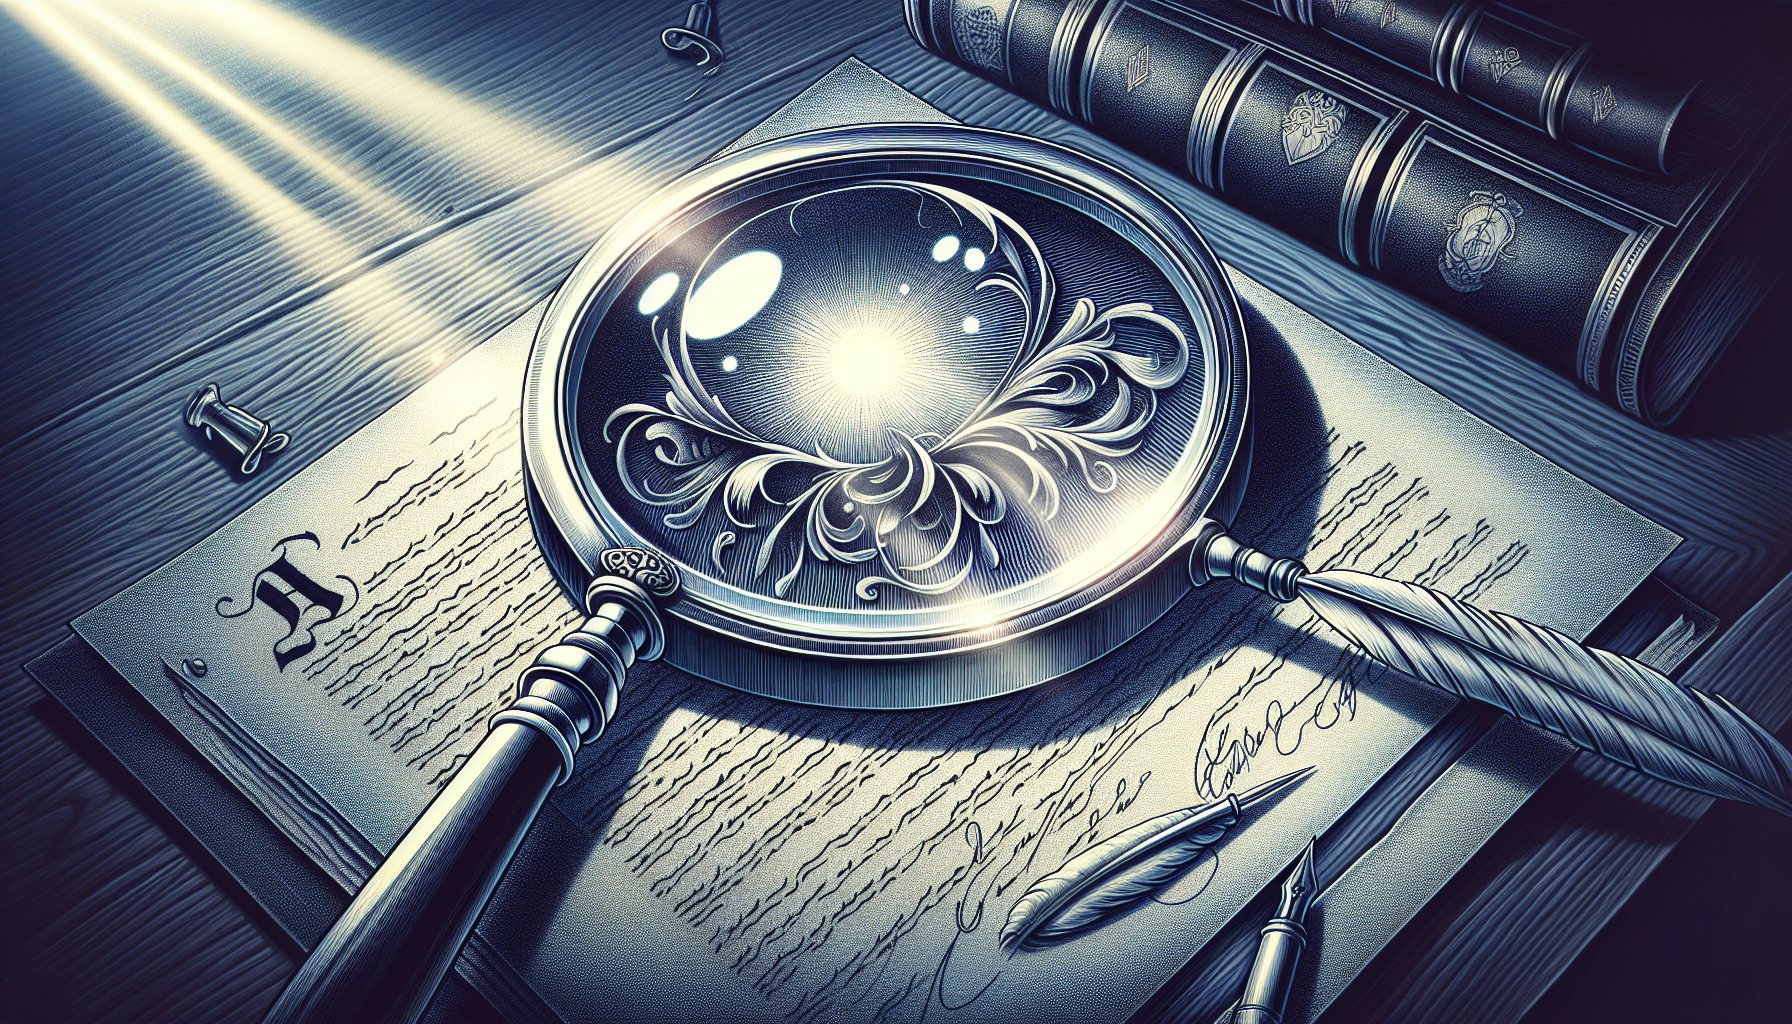 Illustration of a magnifying glass examining a contract for clarity